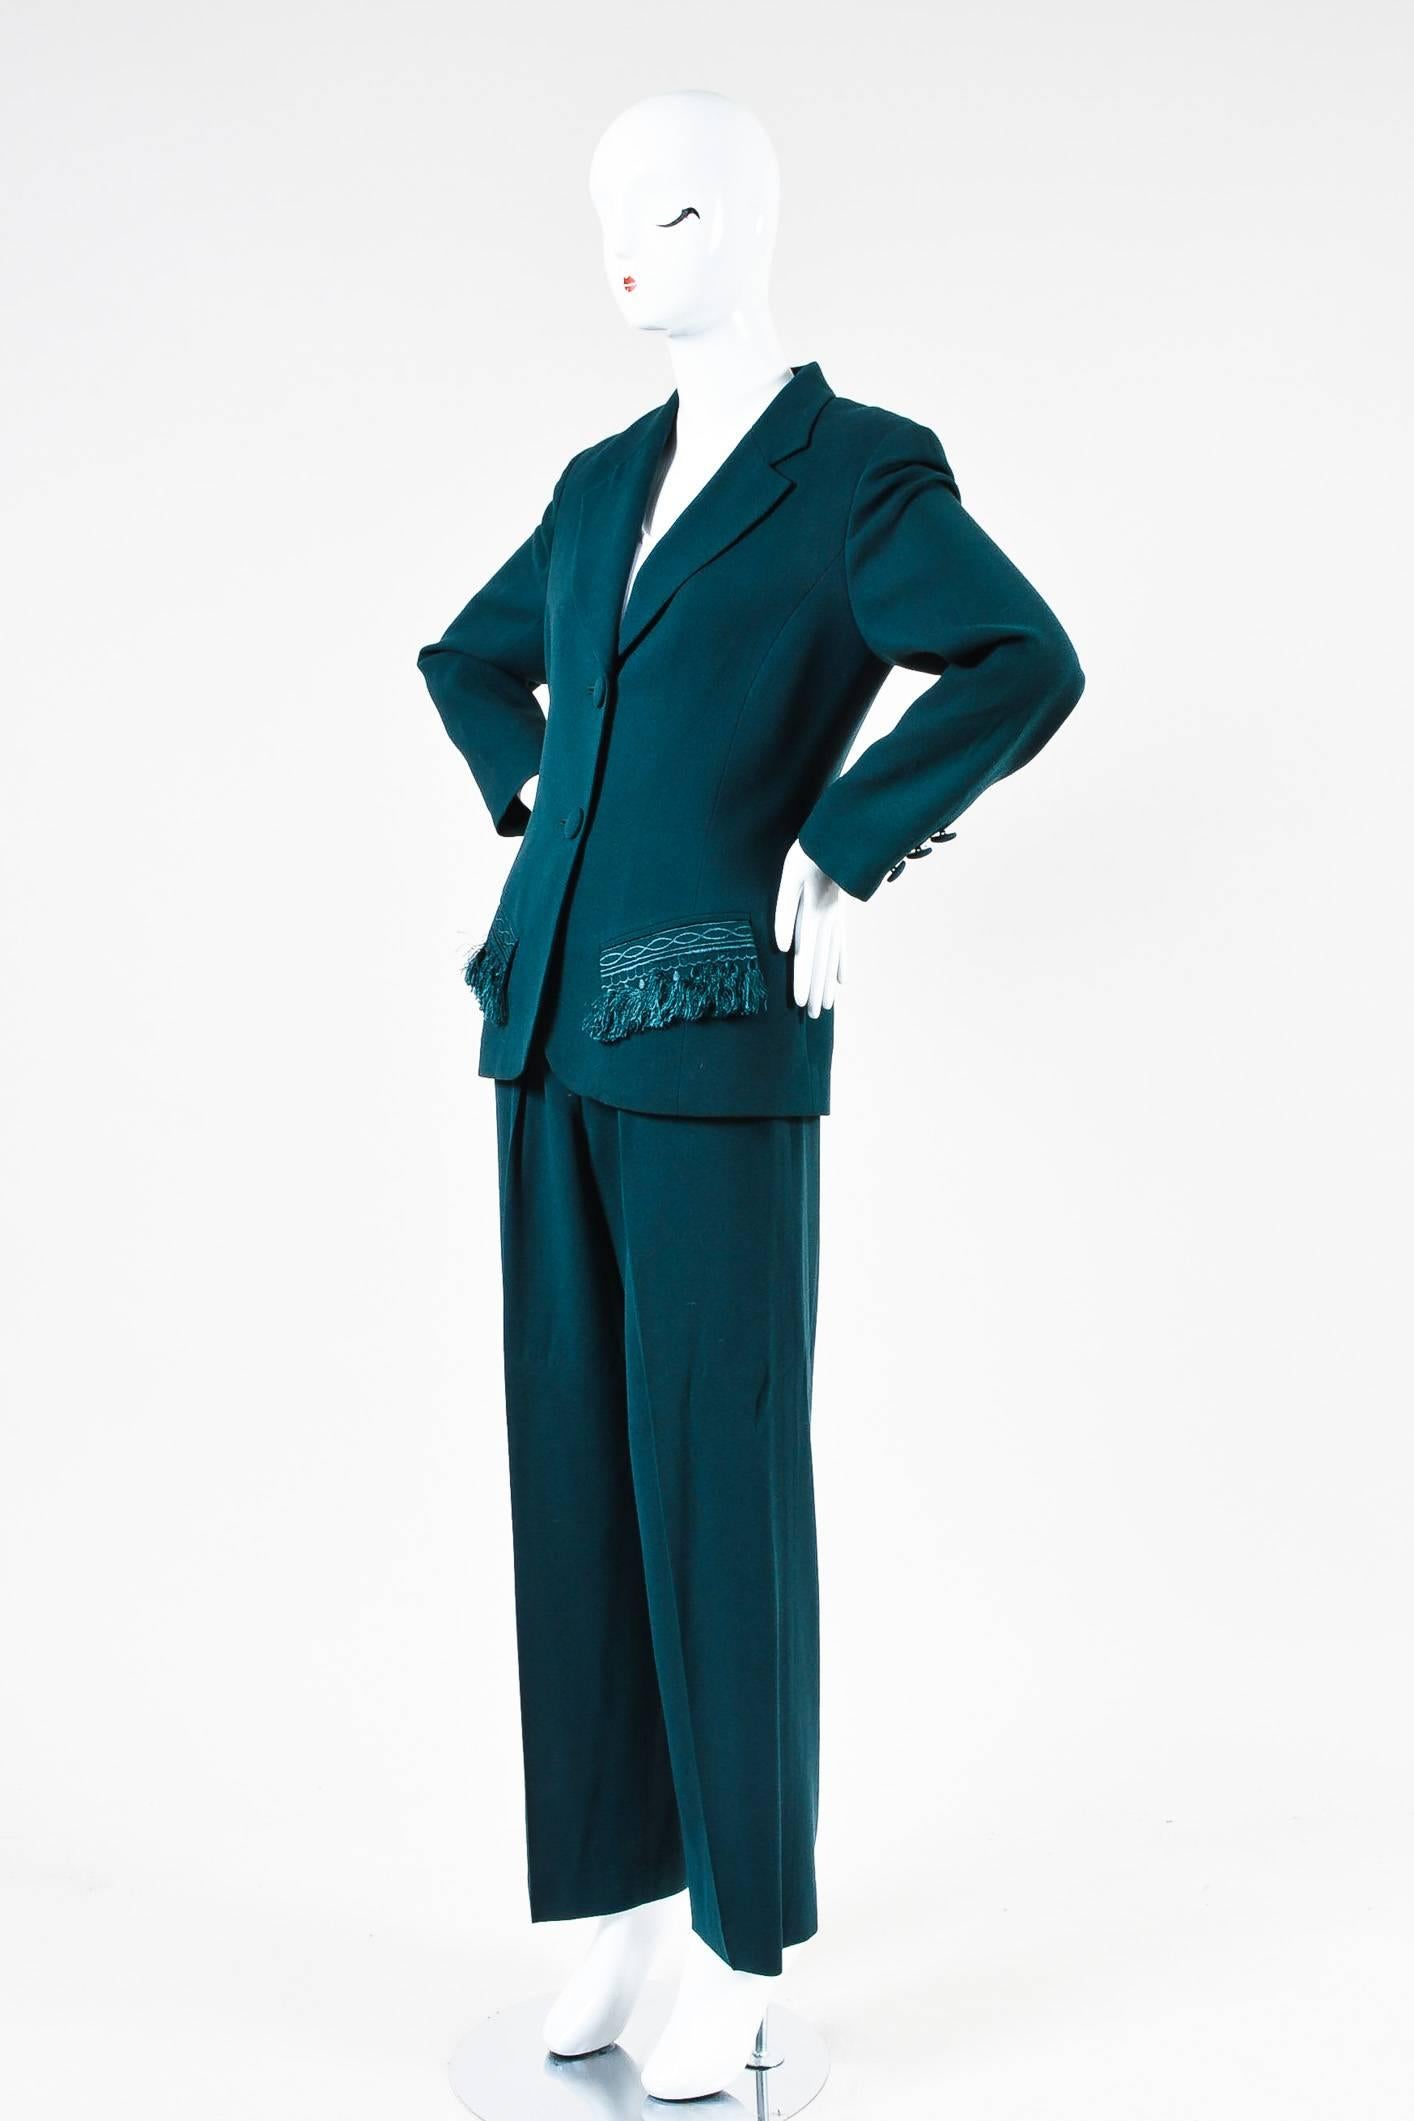 Jacket features a notched lapel, a dual button front, two front flap pockets with fringe trim, buttoned sleeve plackets, and structured shoulders. Pants feature creased legs, pleating, two front pockets, and wide legs.